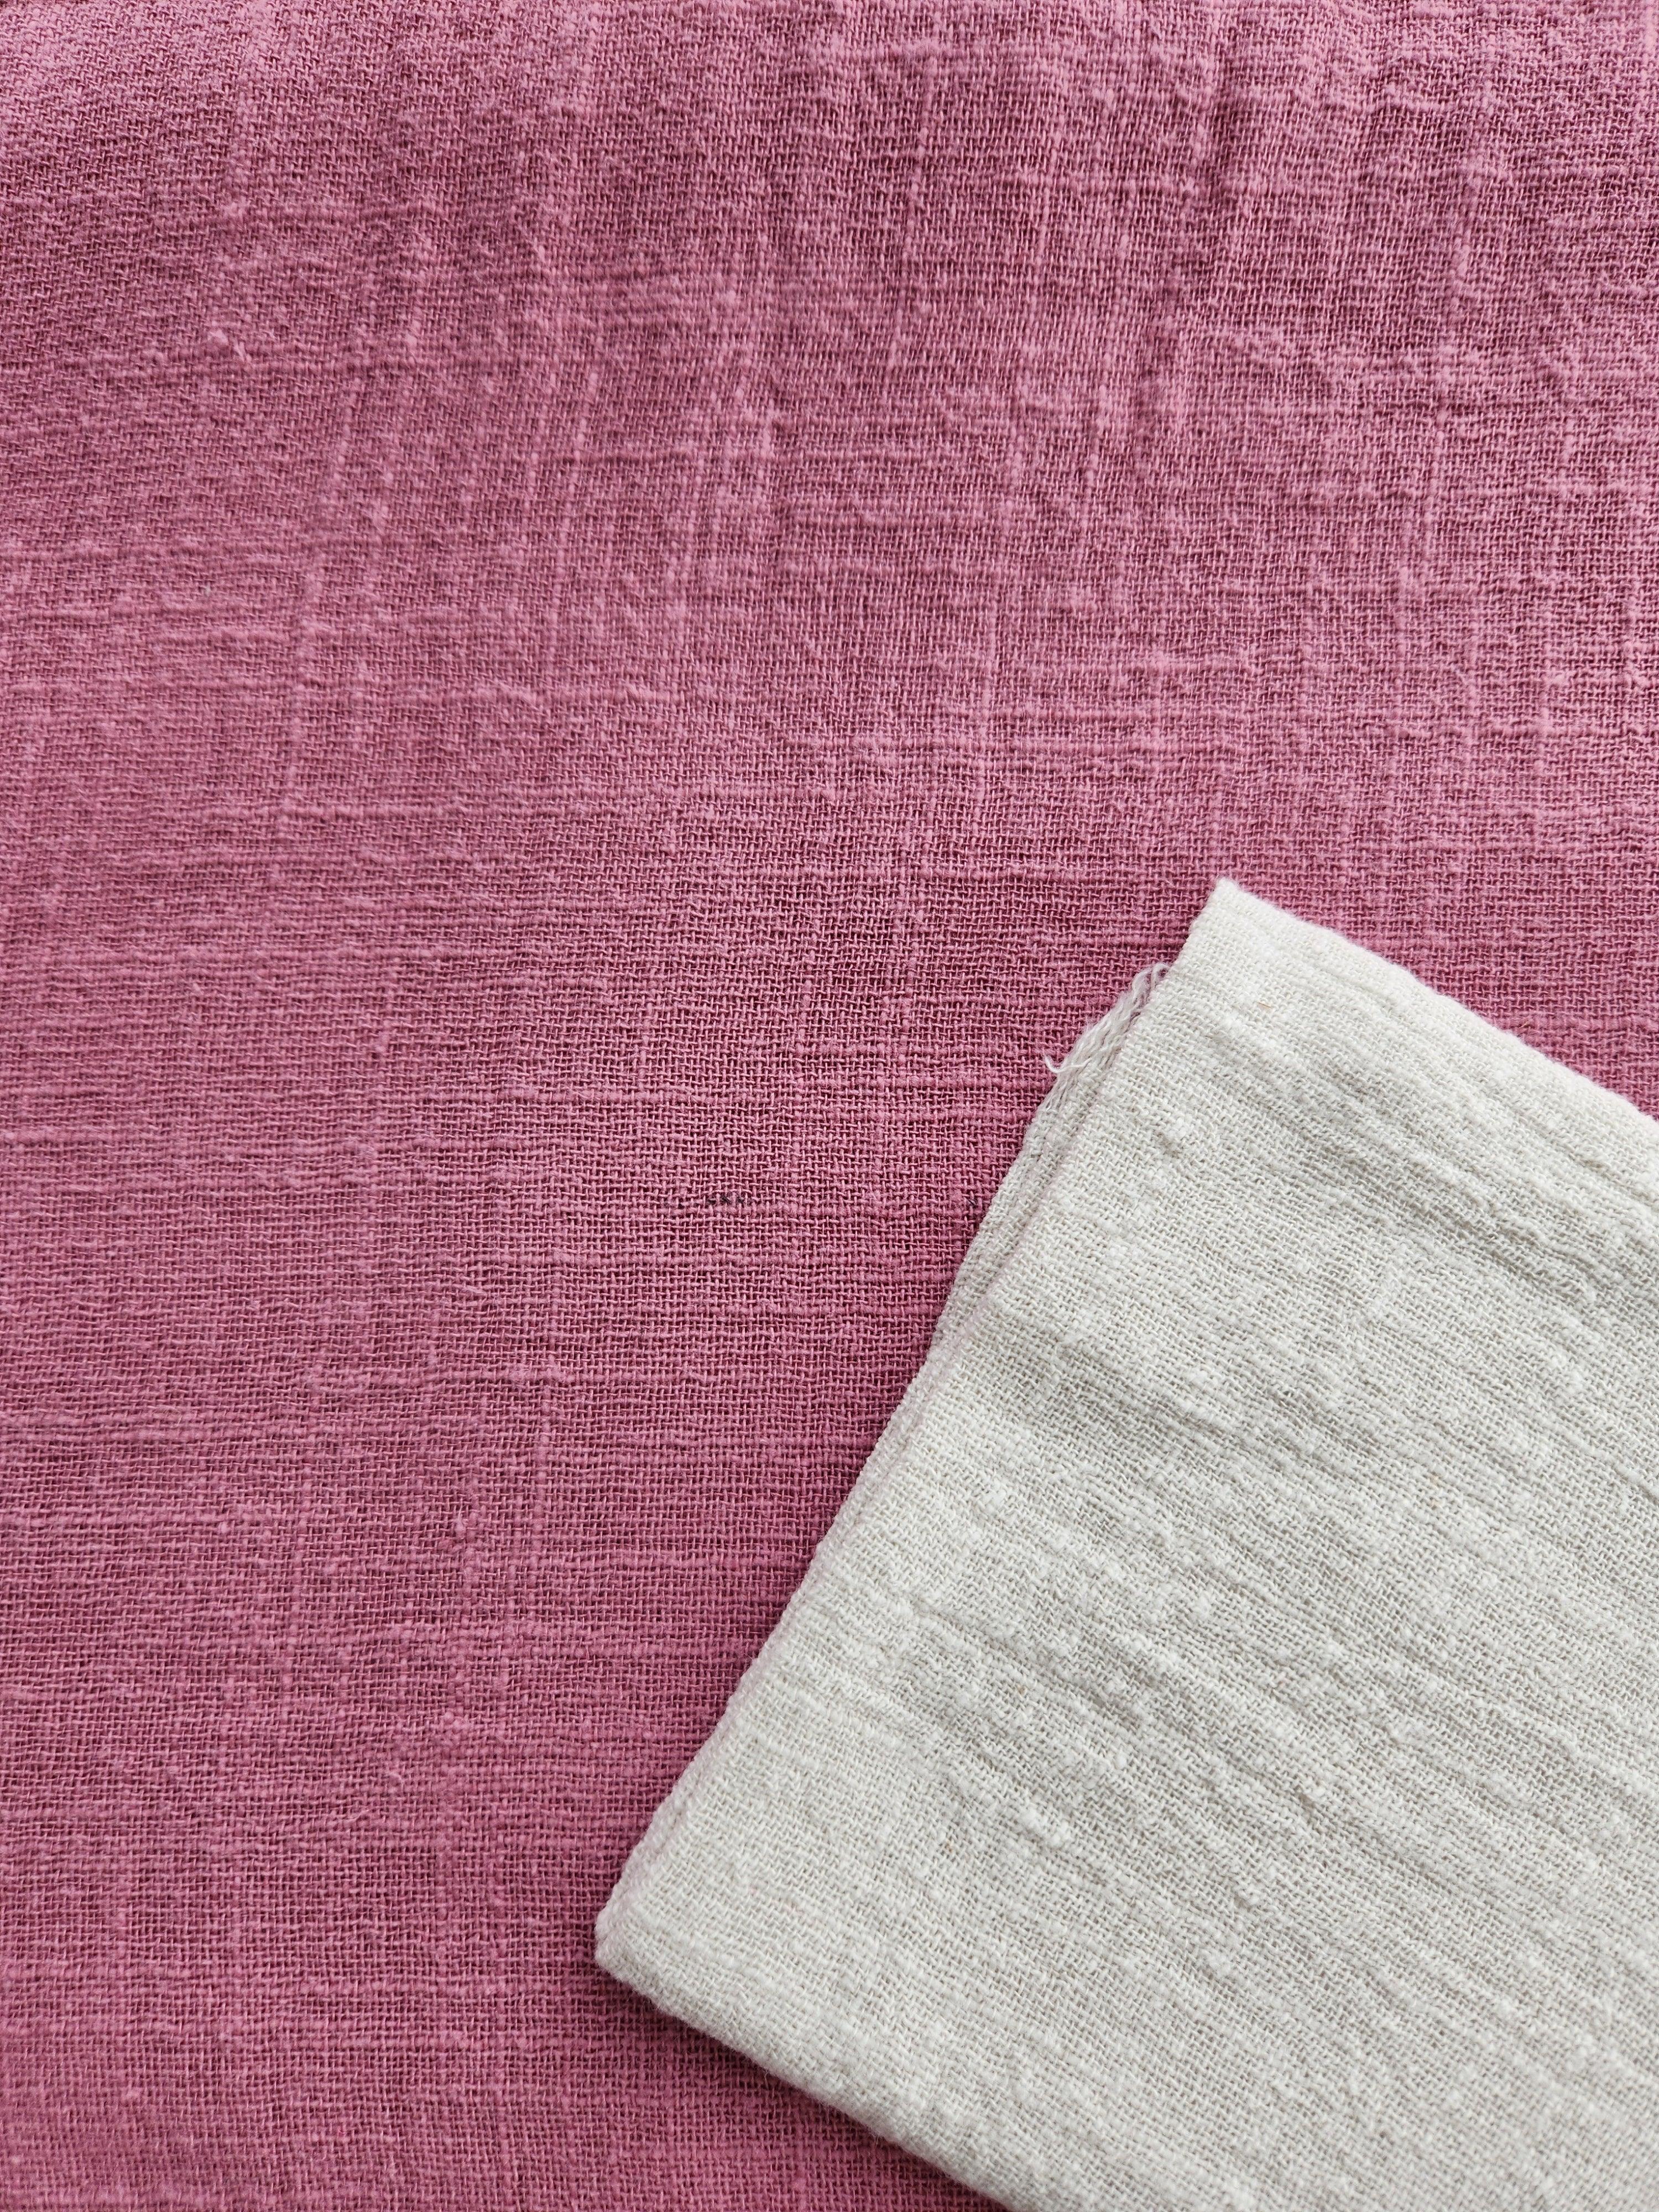 Maison Runner and Napkin Set | Exclusive Colour Combos